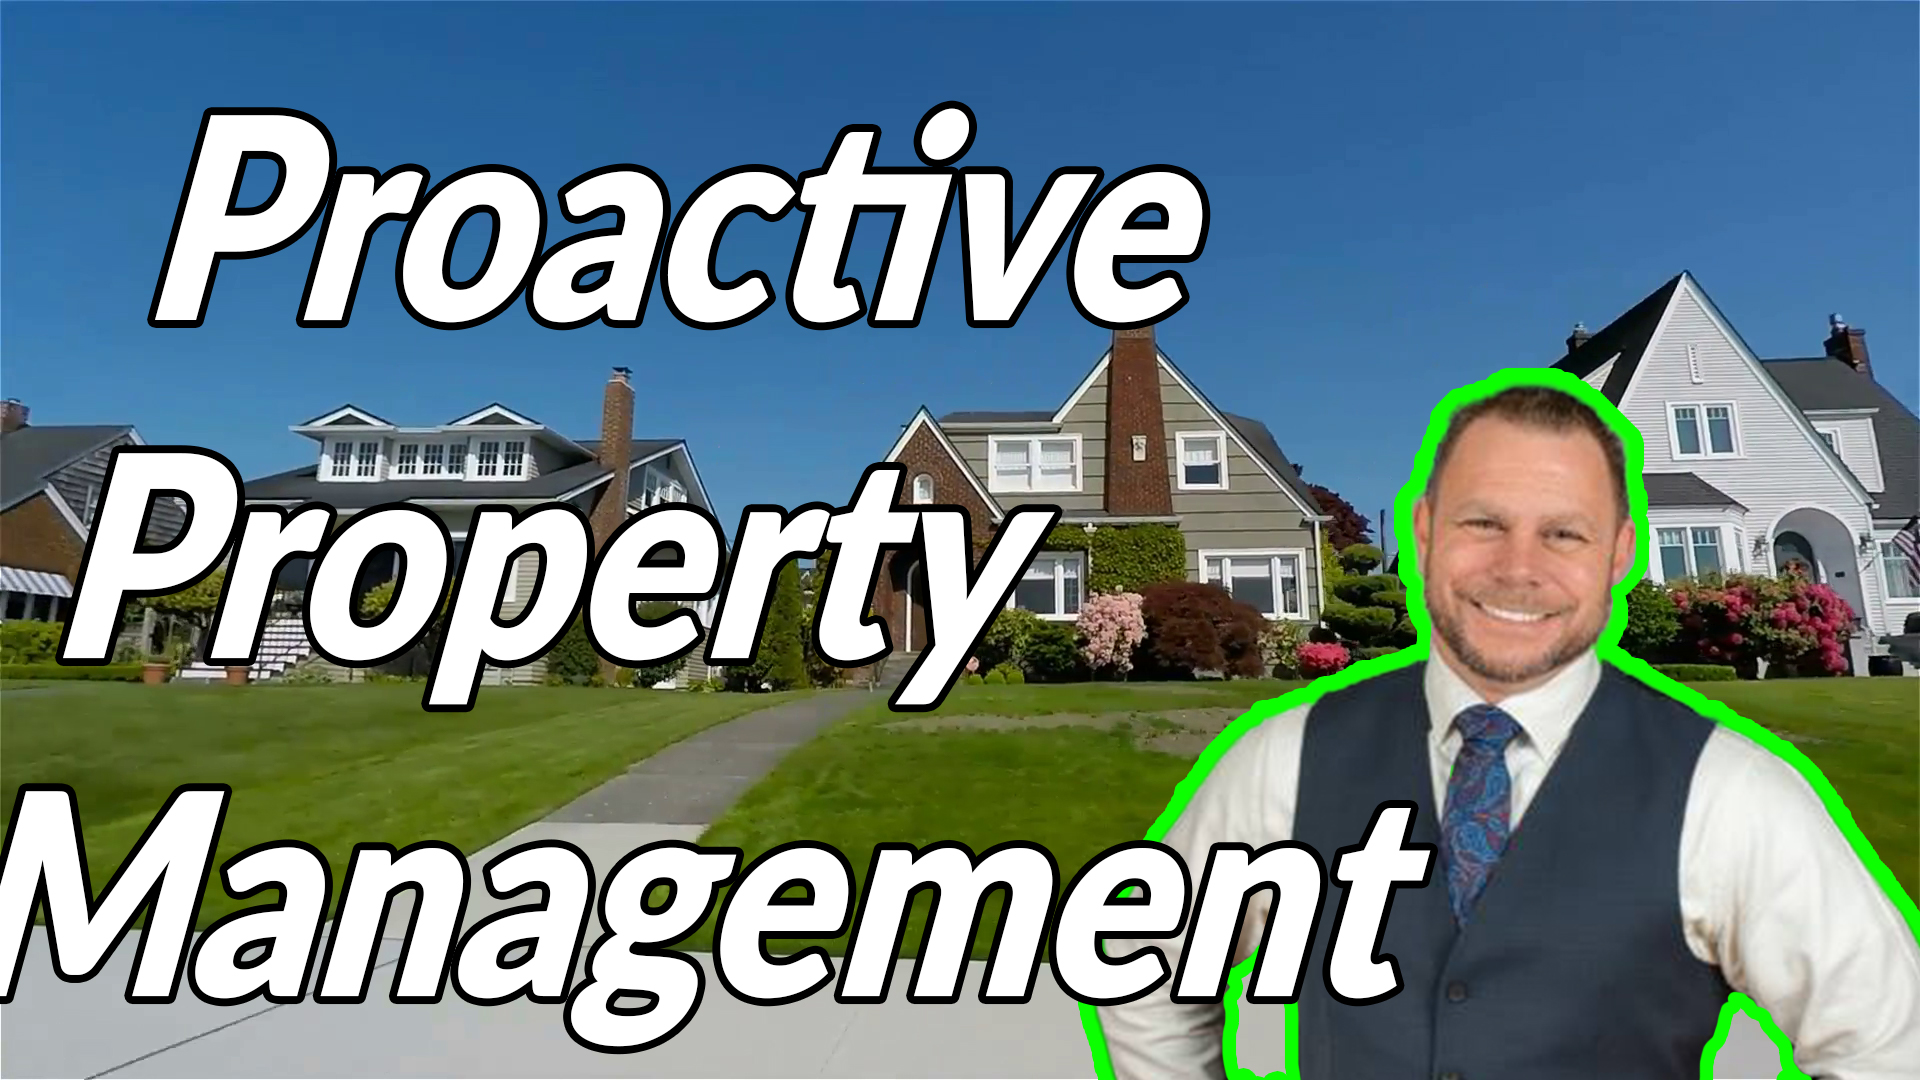 You are currently viewing Proactive Property Management: Al Sartorelli Learns from COVID